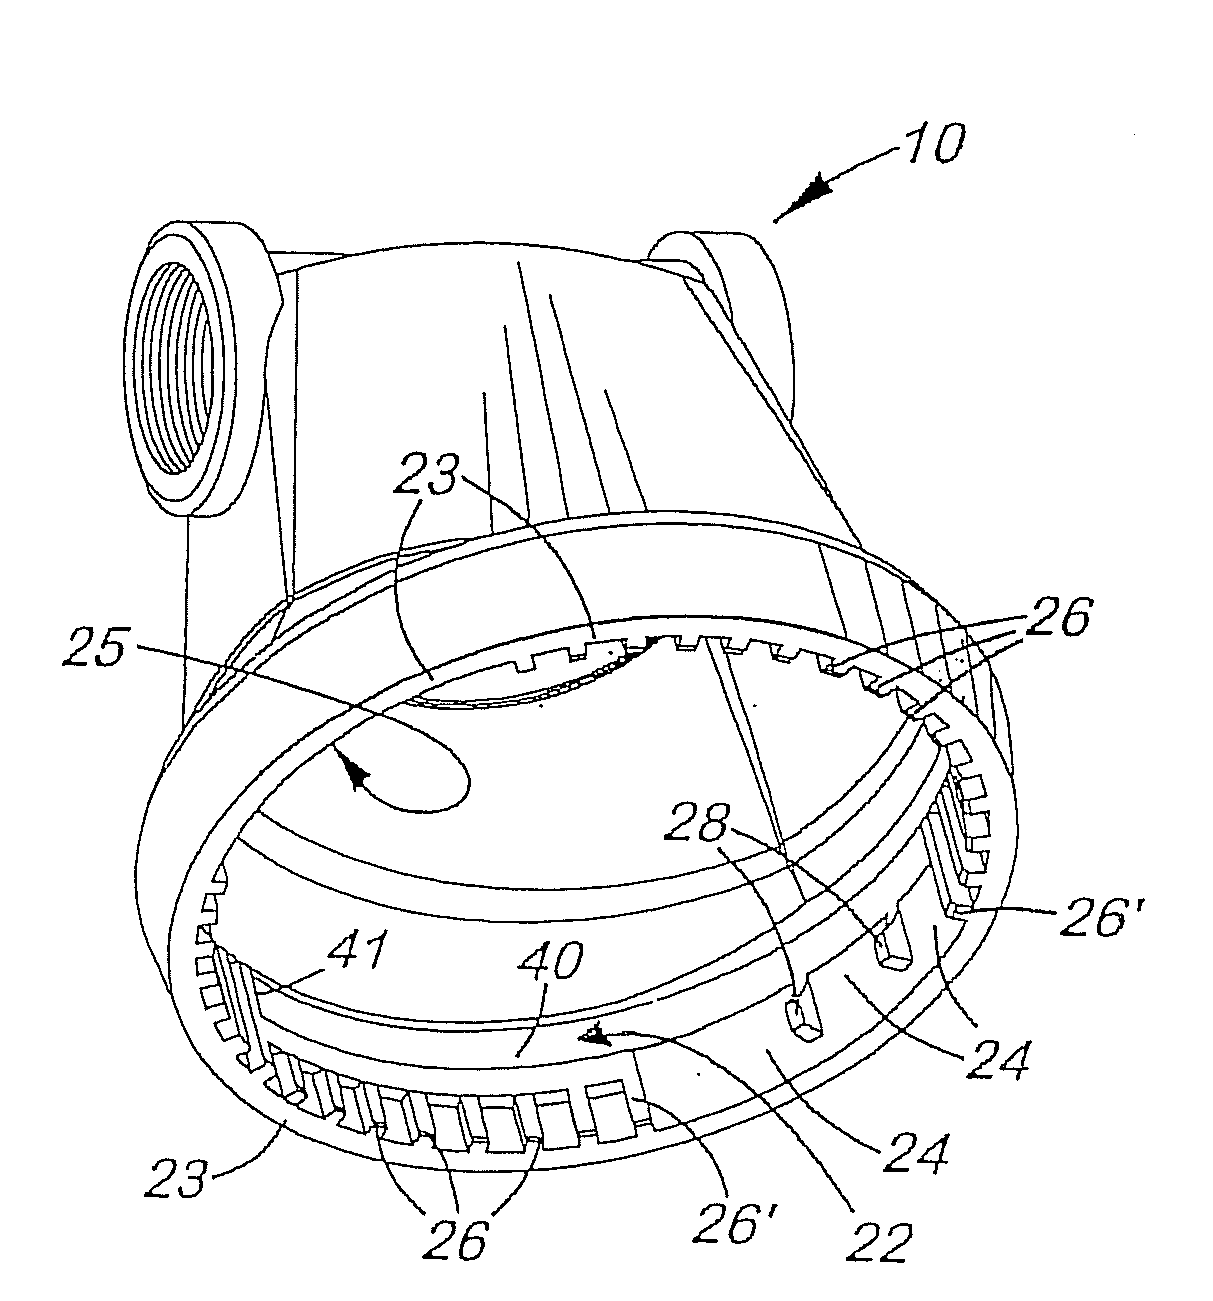 Keyed system for connection of filter to filter holder